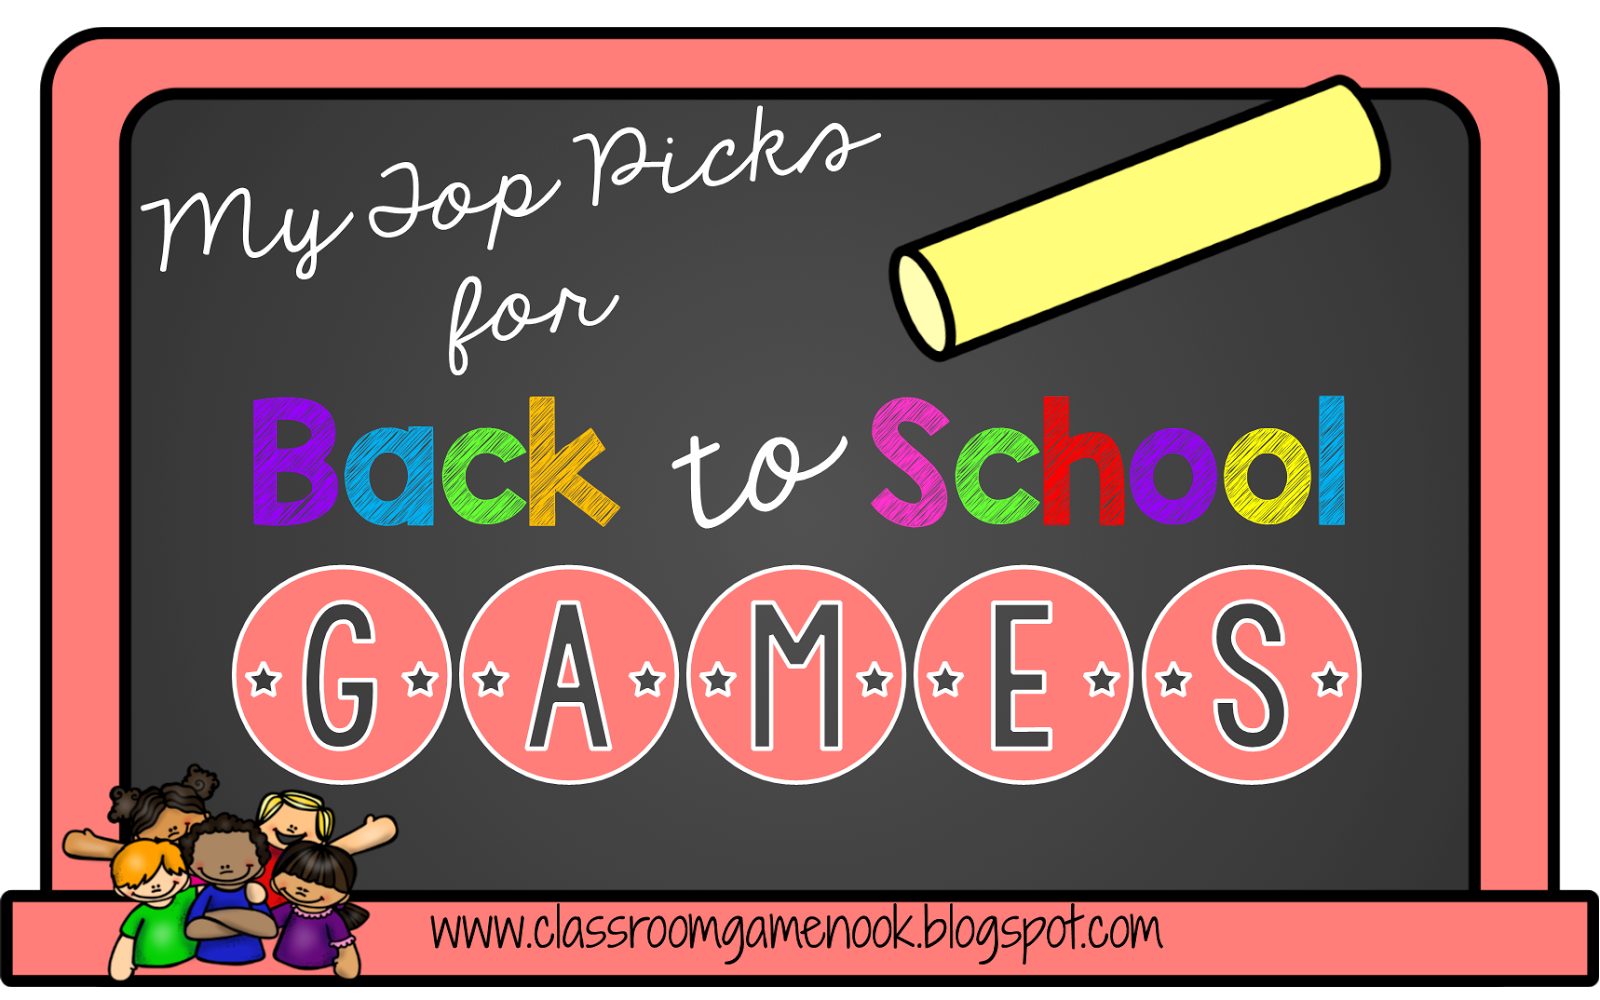 School game. First Day of School. Back to School (1985) игра. First Day of School 5 класс. Синий back to school